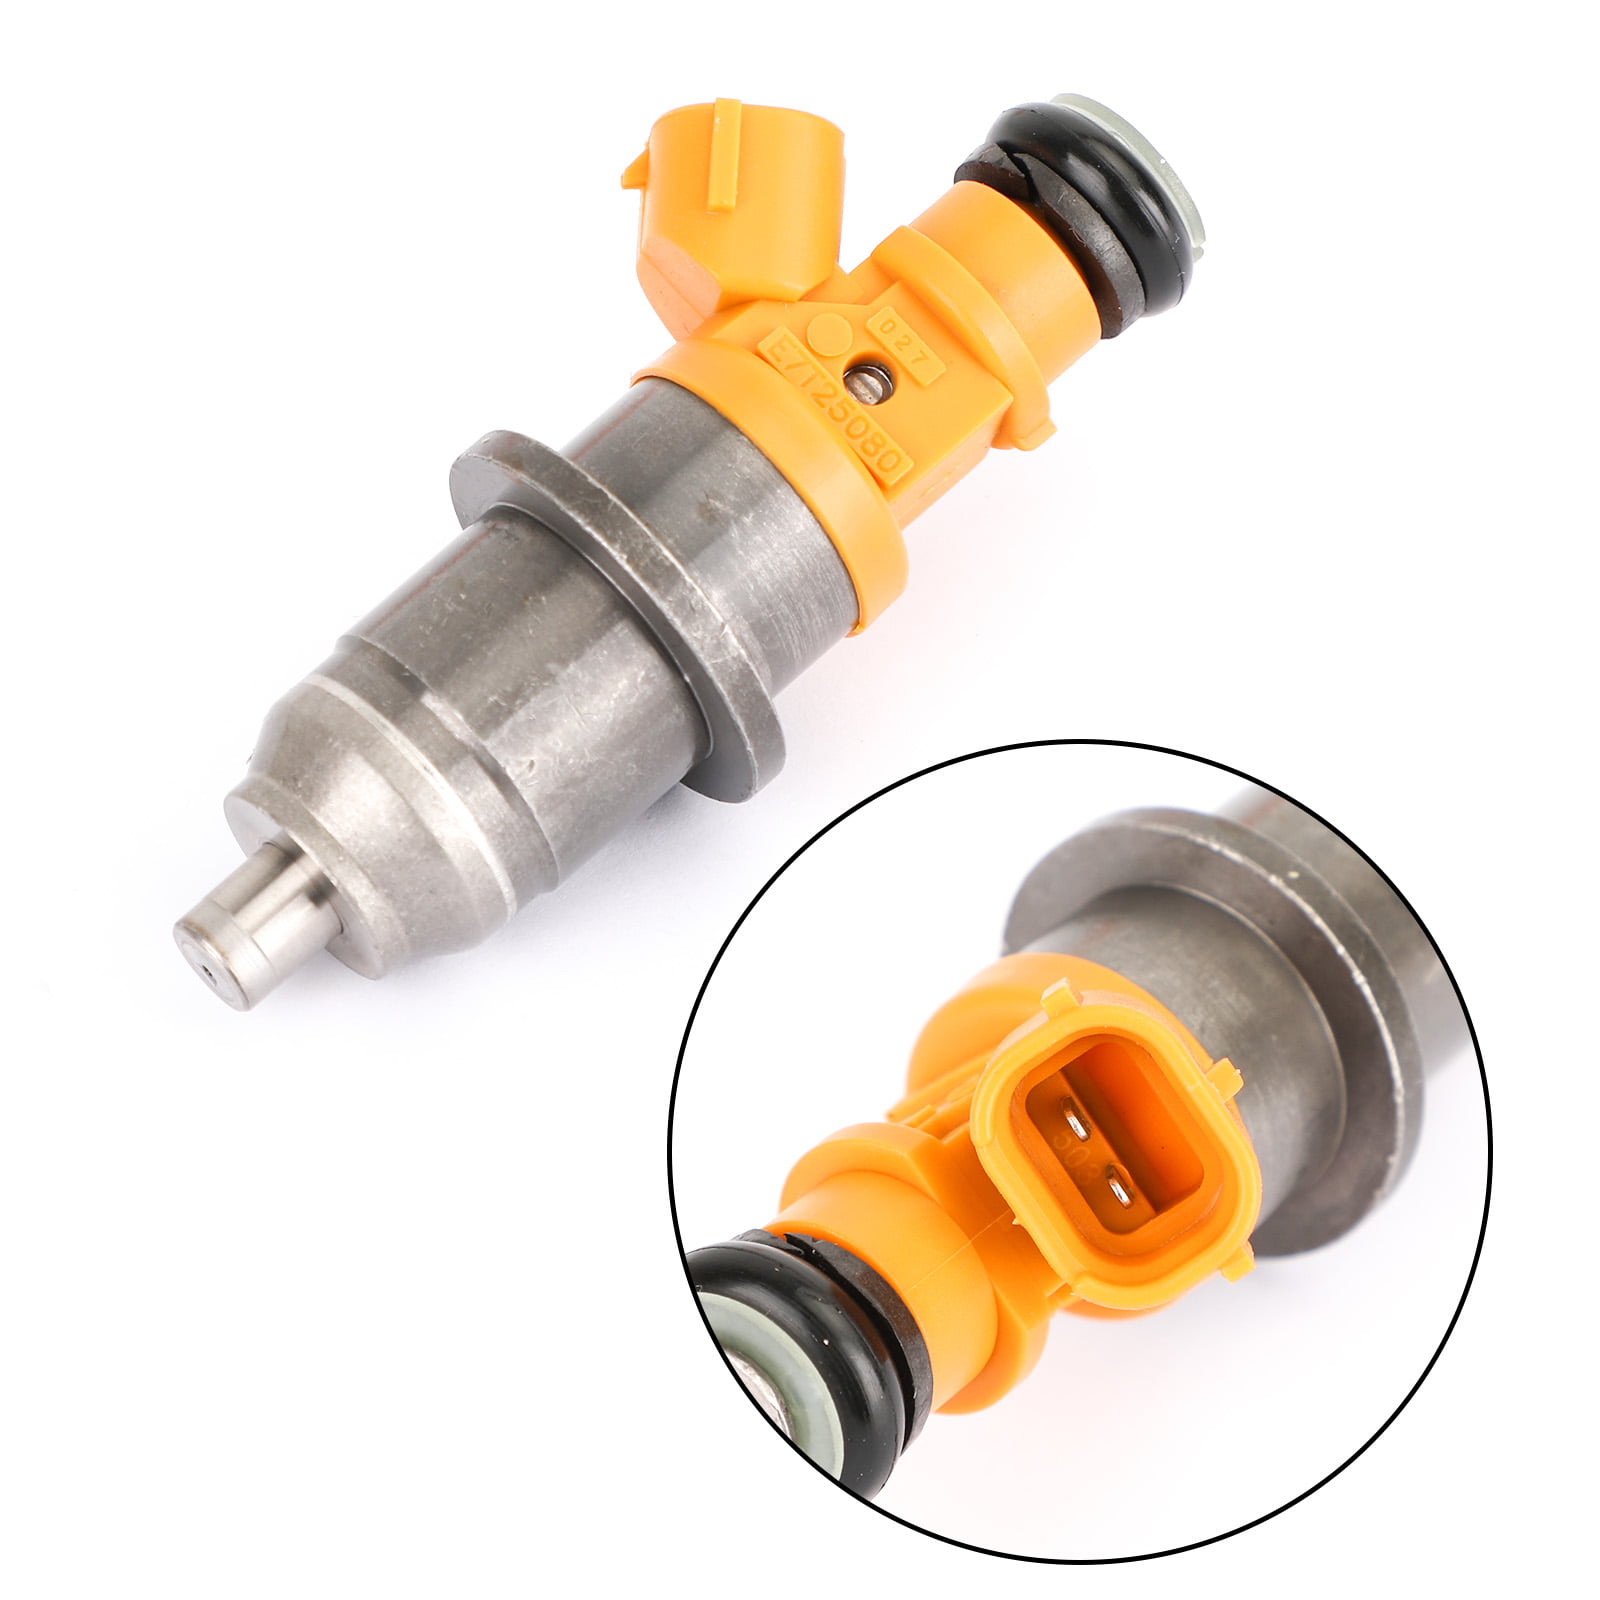 6 Fuel Injector Fit For 03-up 60V-13761-00-00 Yamaha Outboard HPDI 250 300HP